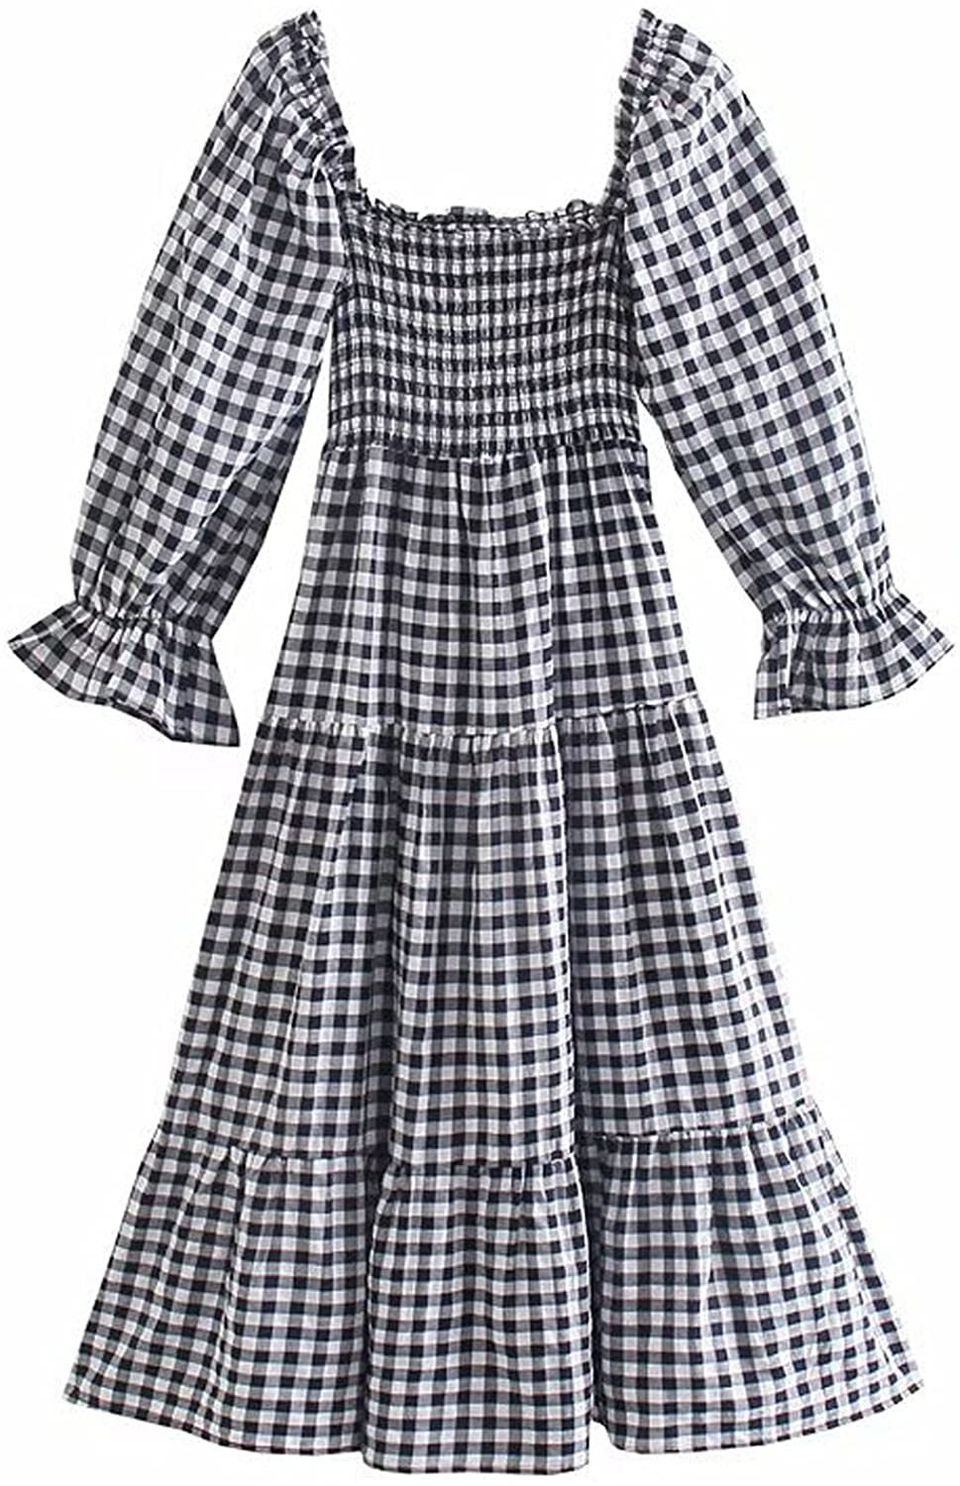 Fashion Fave - Gingham Trend and How to Wear It - Maison de Cinq